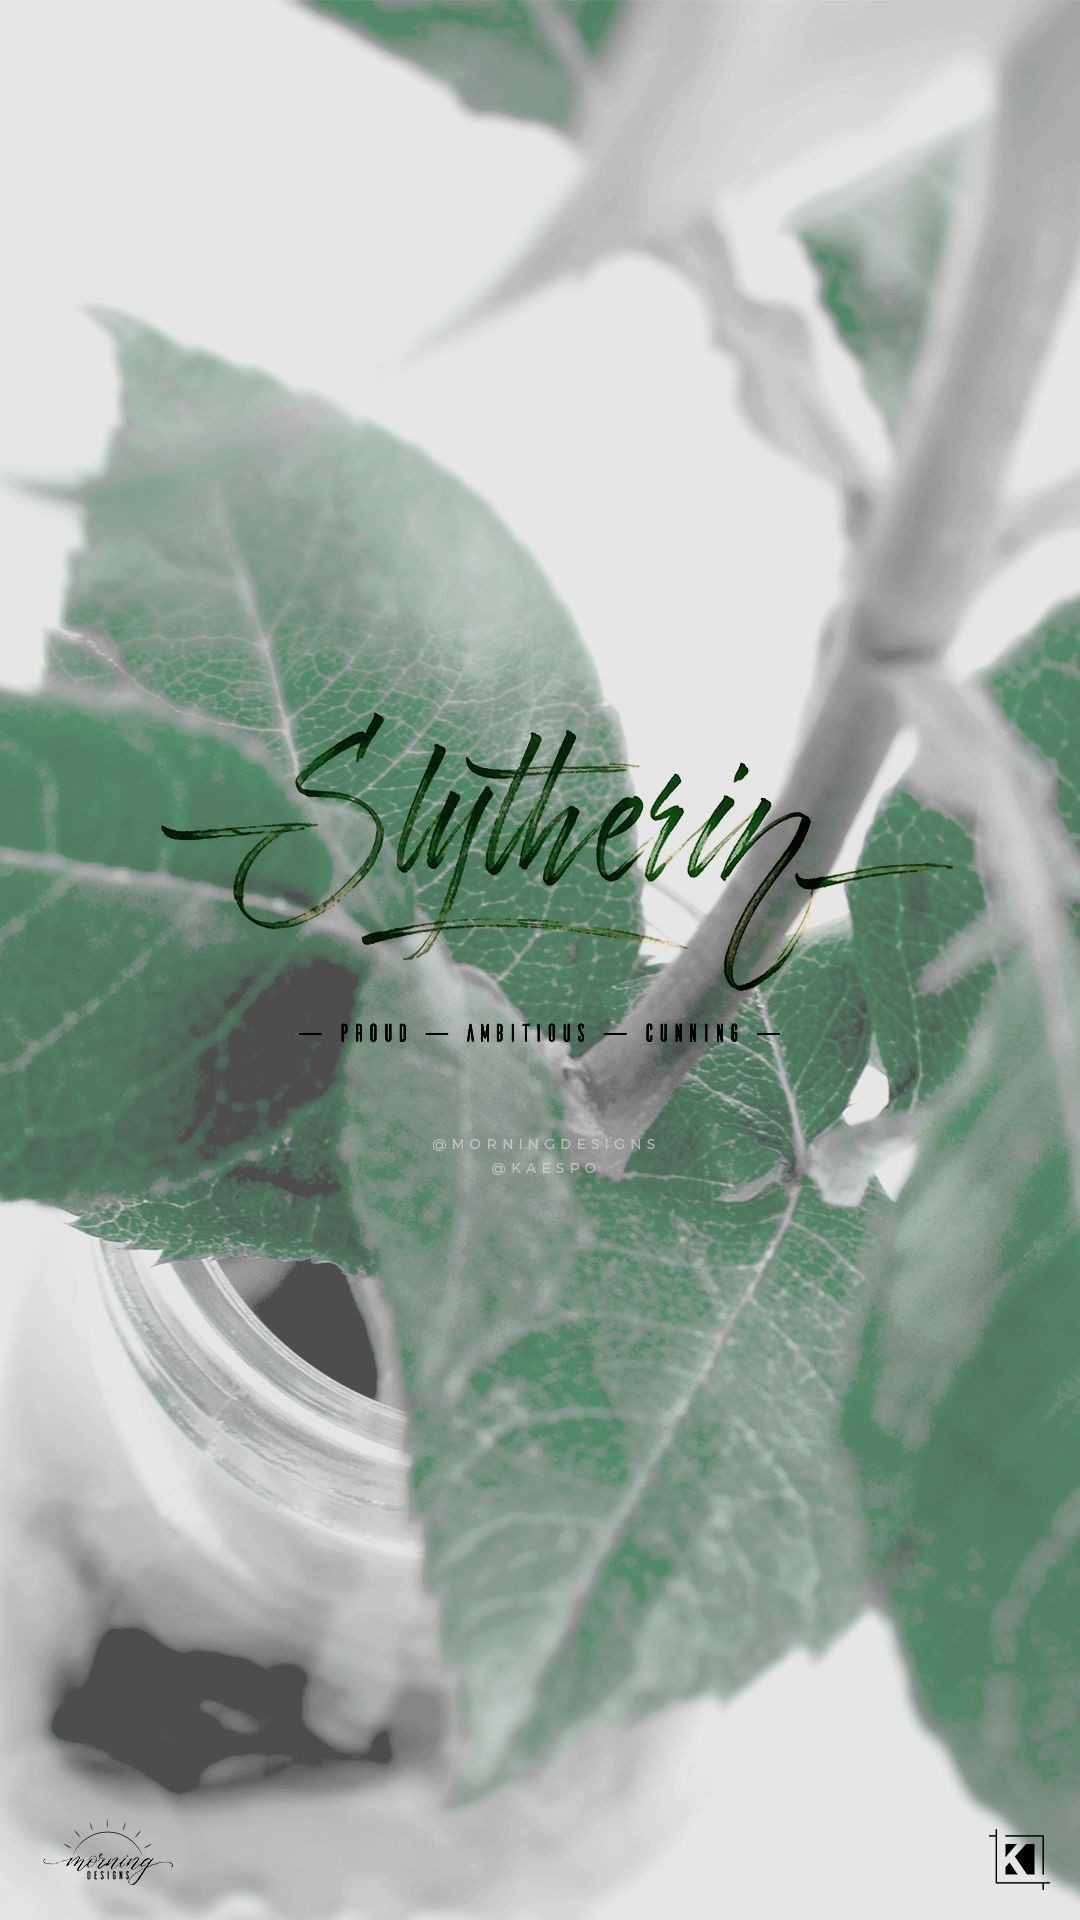 1080x1920 Floral Slytherin Aesthetics Phone Wallpaper Background | Collab by .